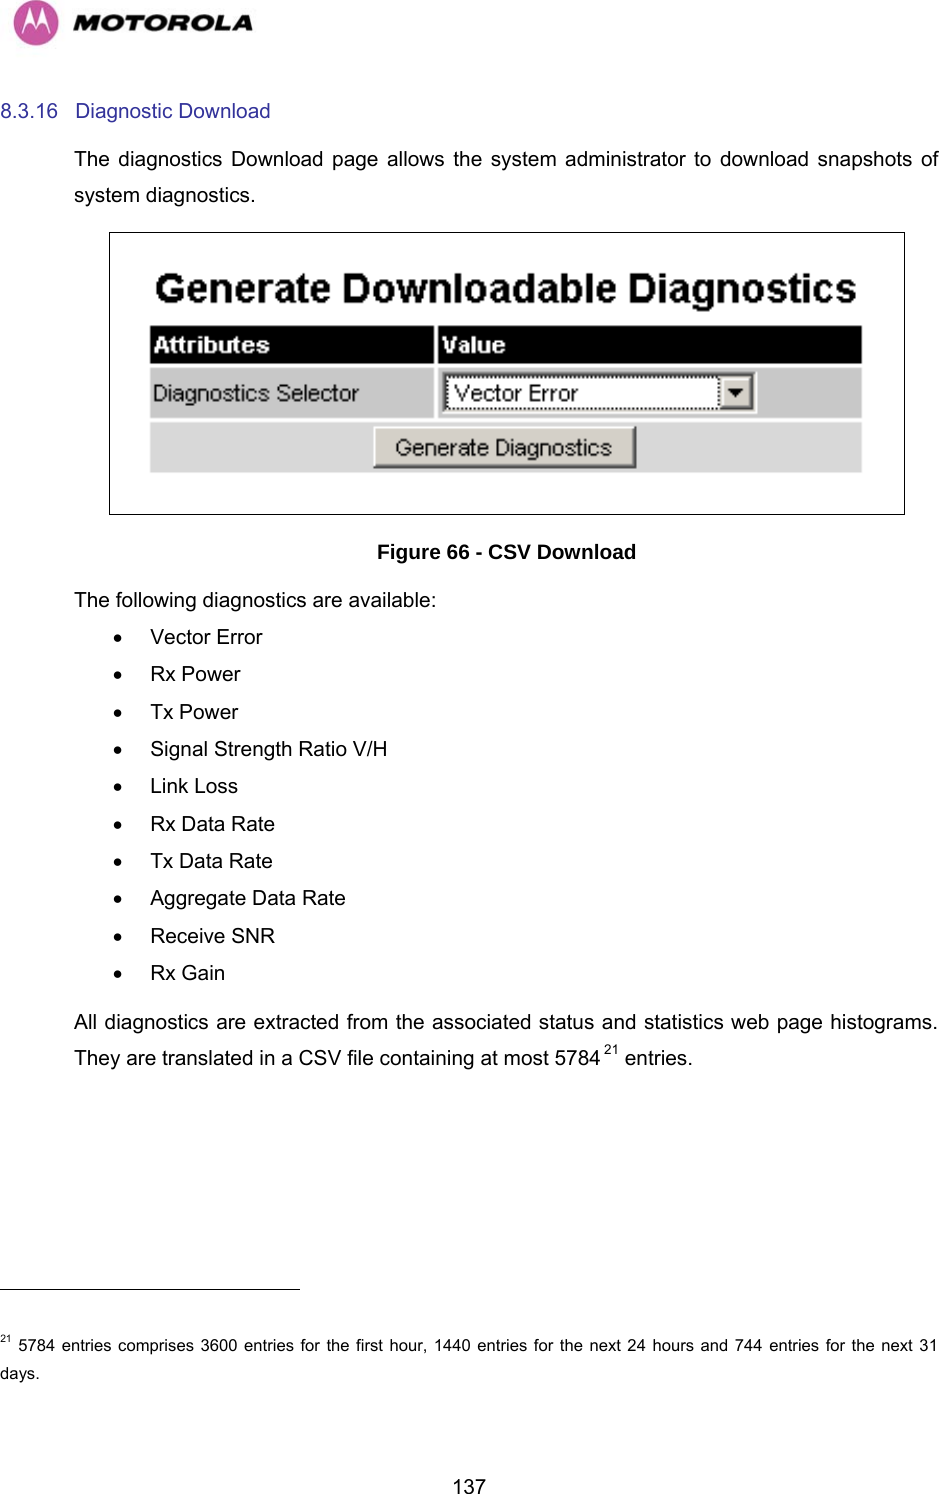   1378.3.16 Diagnostic Download The diagnostics Download page allows the system administrator to download snapshots of system diagnostics.  Figure 66 - CSV Download The following diagnostics are available: • Vector Error • Rx Power • Tx Power •  Signal Strength Ratio V/H • Link Loss •  Rx Data Rate •  Tx Data Rate •  Aggregate Data Rate • Receive SNR • Rx Gain All diagnostics are extracted from the associated status and statistics web page histograms. They are translated in a CSV file containing at most 5784F21 entries.                                                       21 5784 entries comprises 3600 entries for the first hour, 1440 entries for the next 24 hours and 744 entries for the next 31 days. 